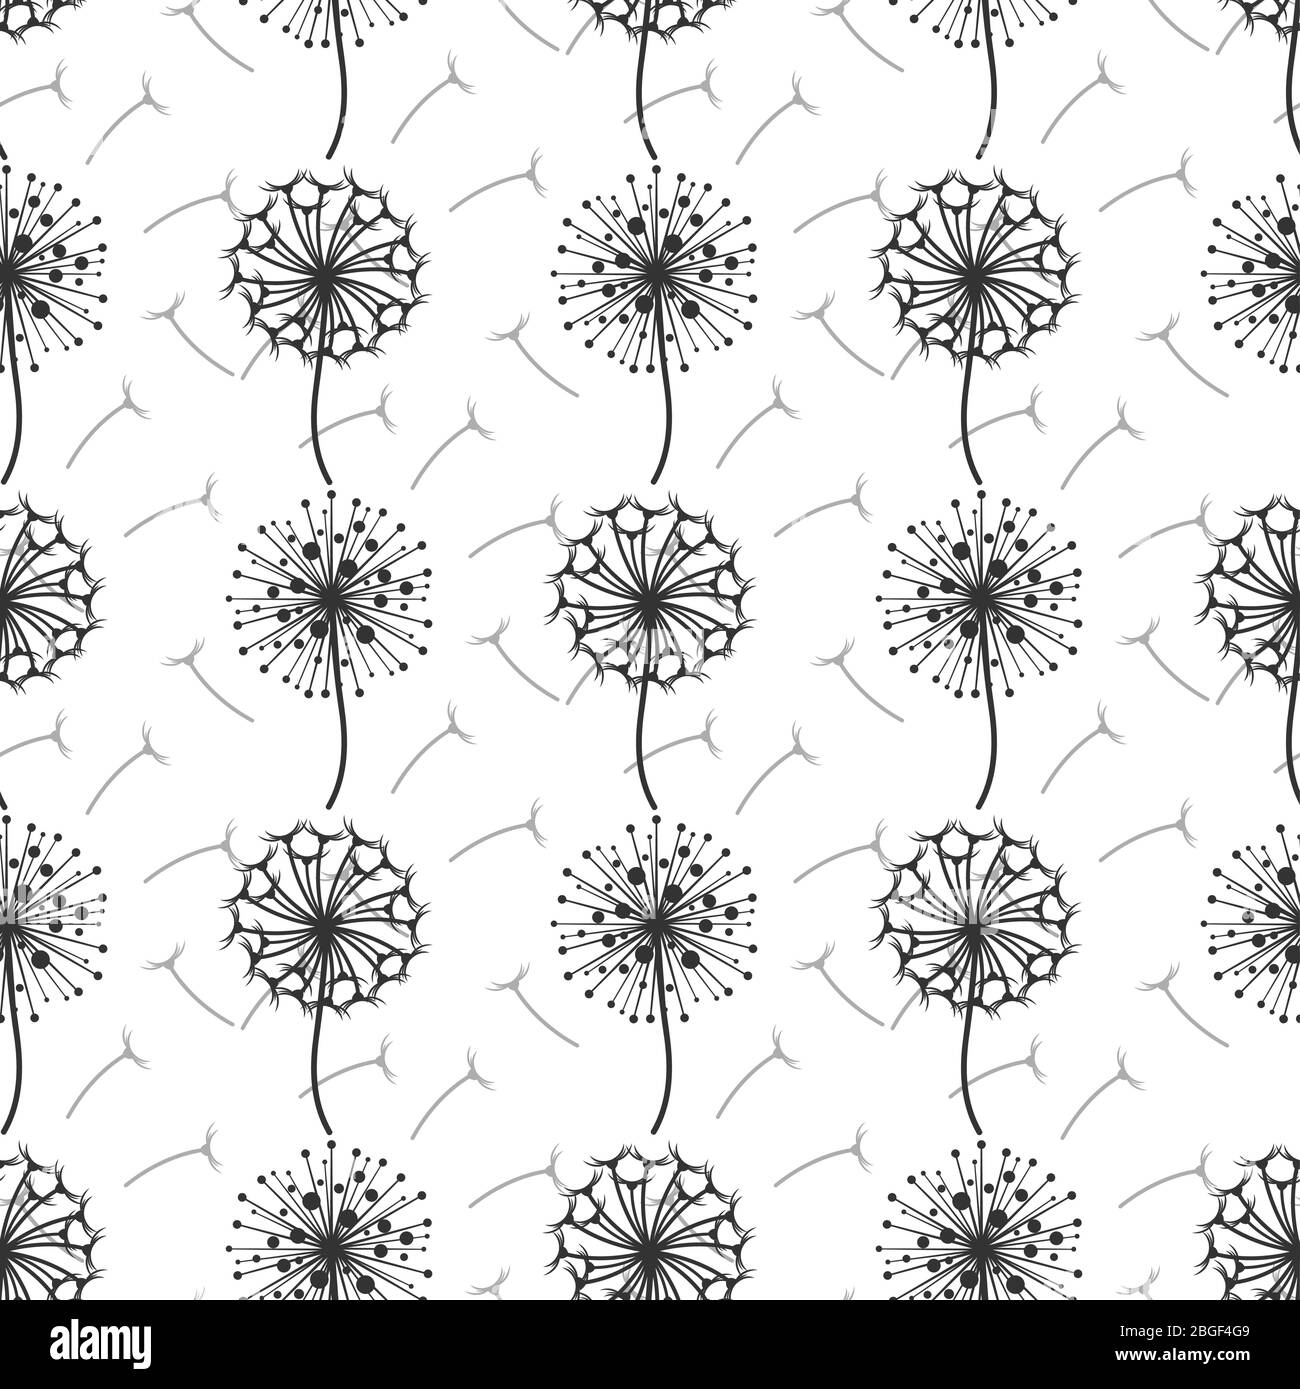 Monochrome dandelion flowers and seeds seamless pattern background. Vector illustration Stock Vector